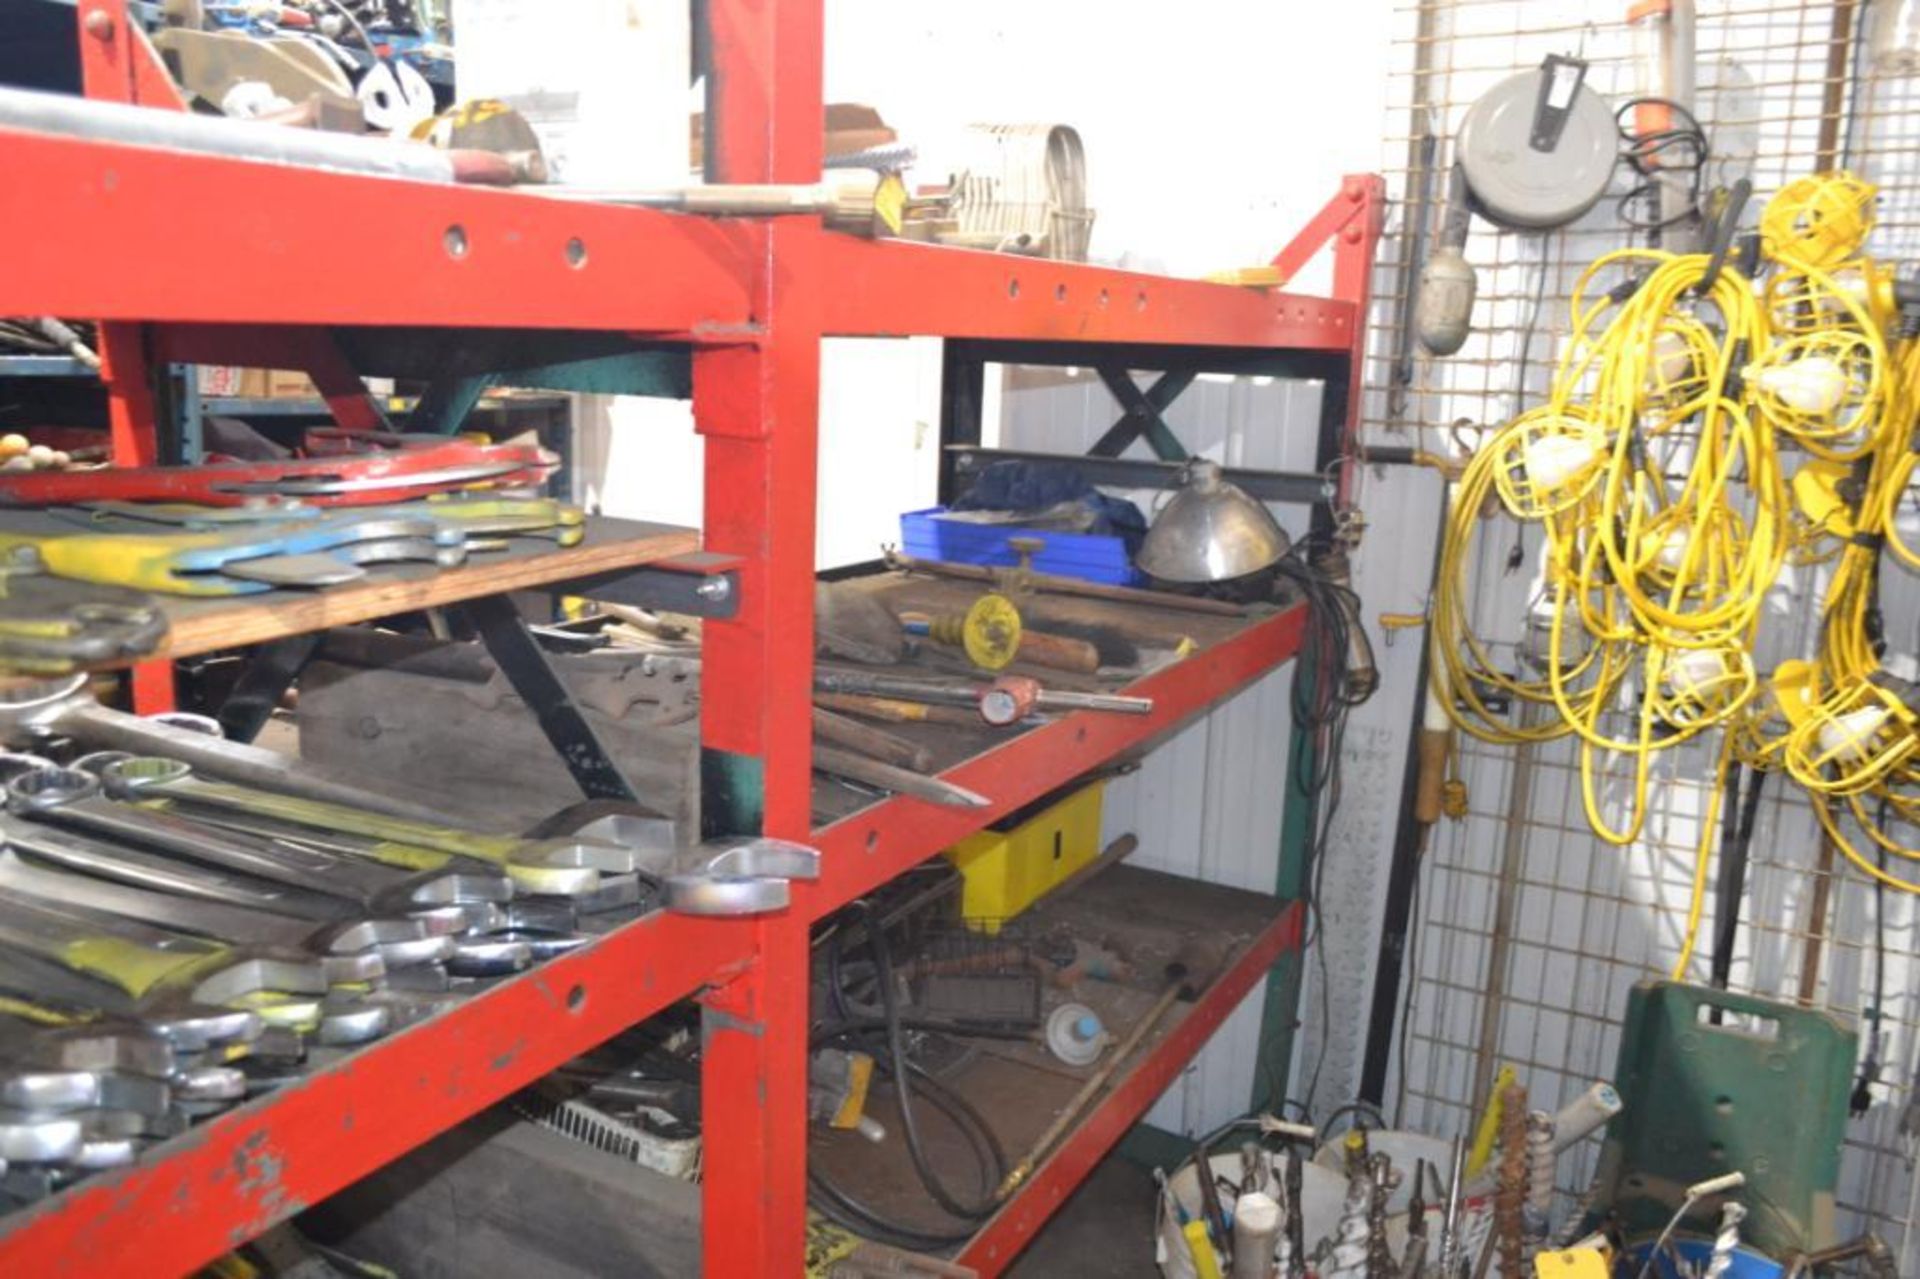 LOT: STEEL SHELVING UNIT WITH CONTENTS OF LARGE COMBO WRENCHES; WORK LIGHTS; SOCKET SETS; IMPACT - Image 7 of 7